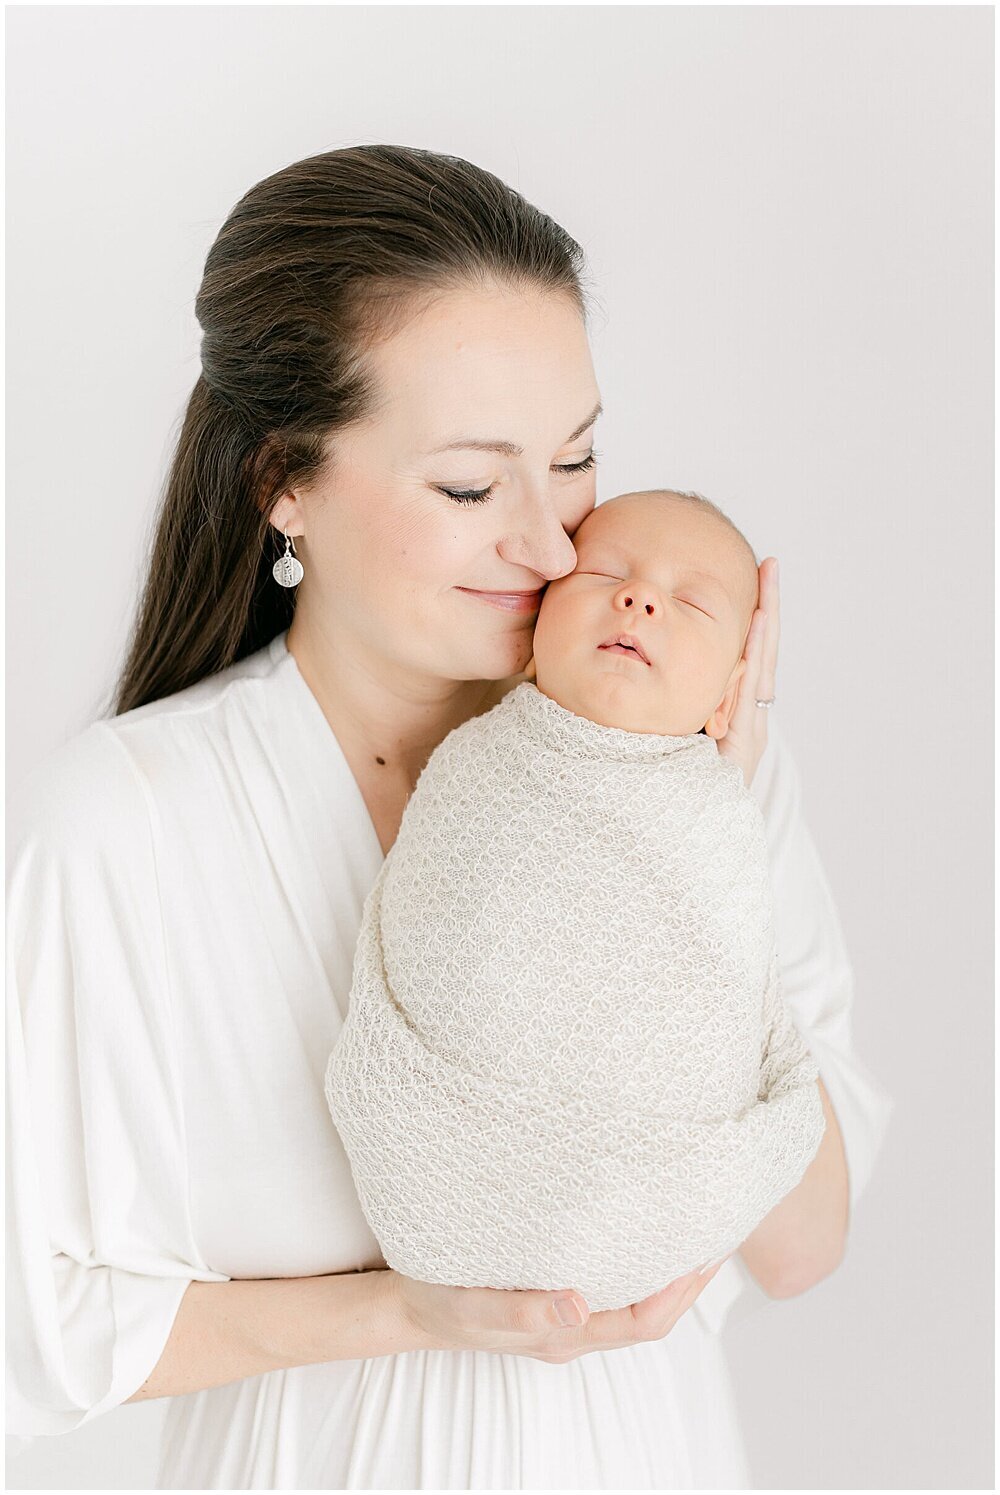 A Northern Virginia Newborn Photography photo of a mother and baby snuggling in front of a white wall